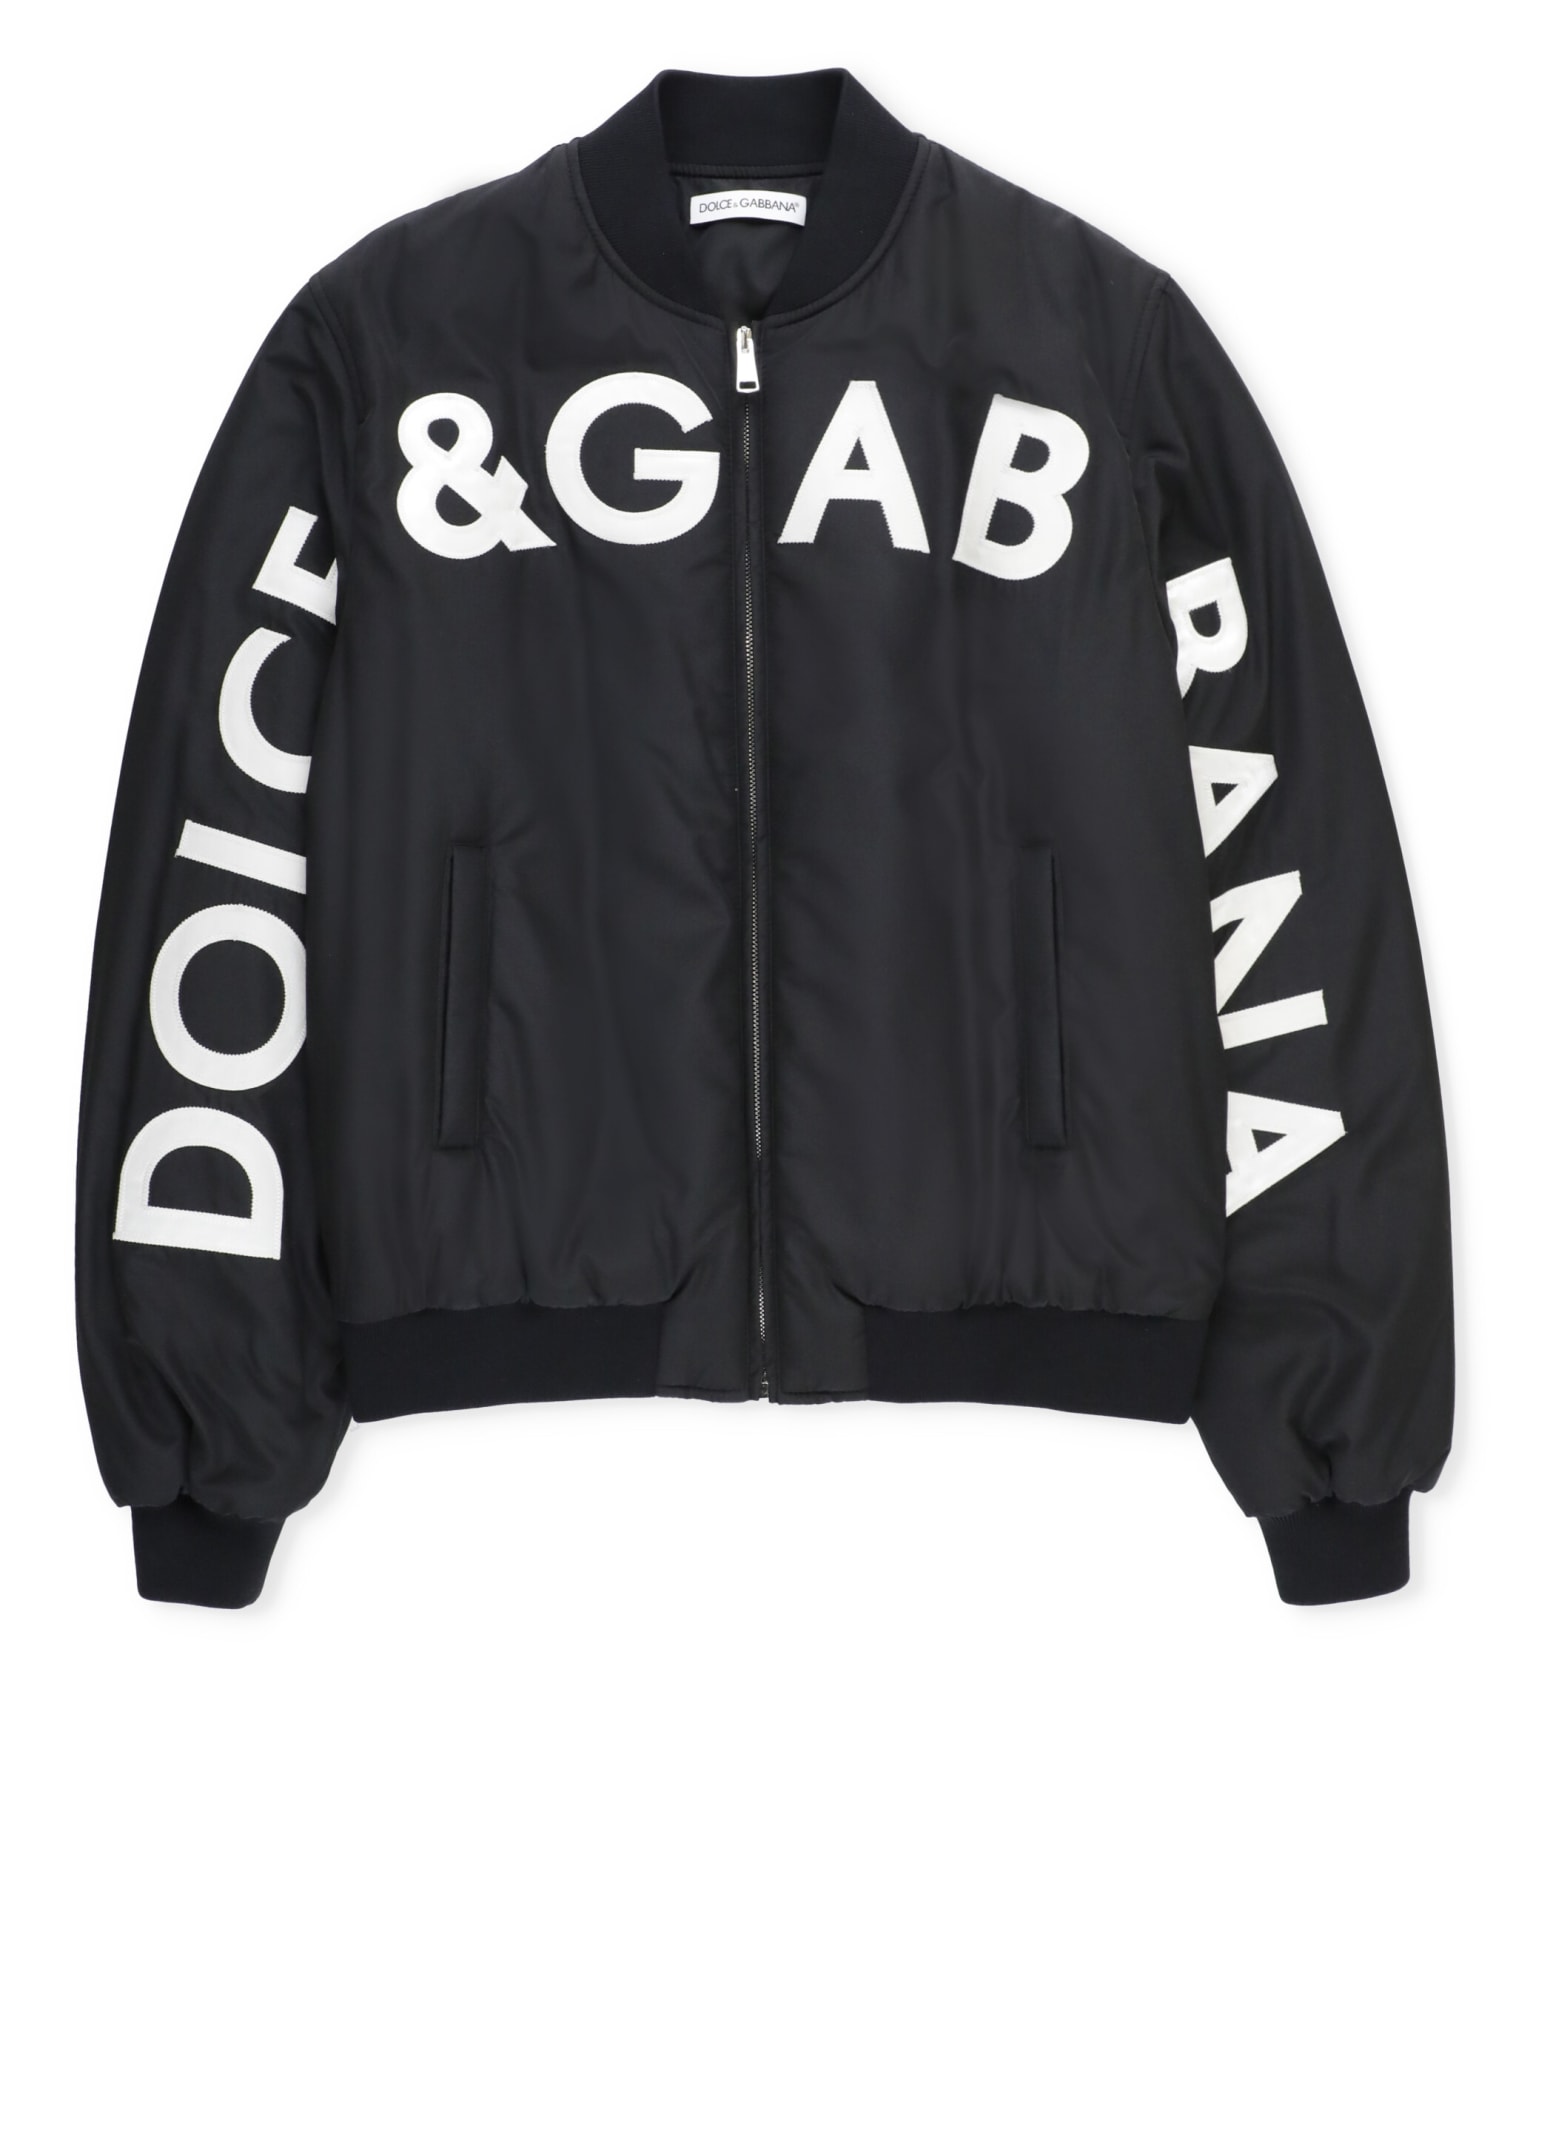 DOLCE & GABBANA BOMBER JACKET WITH EMBROIDERED LOGO